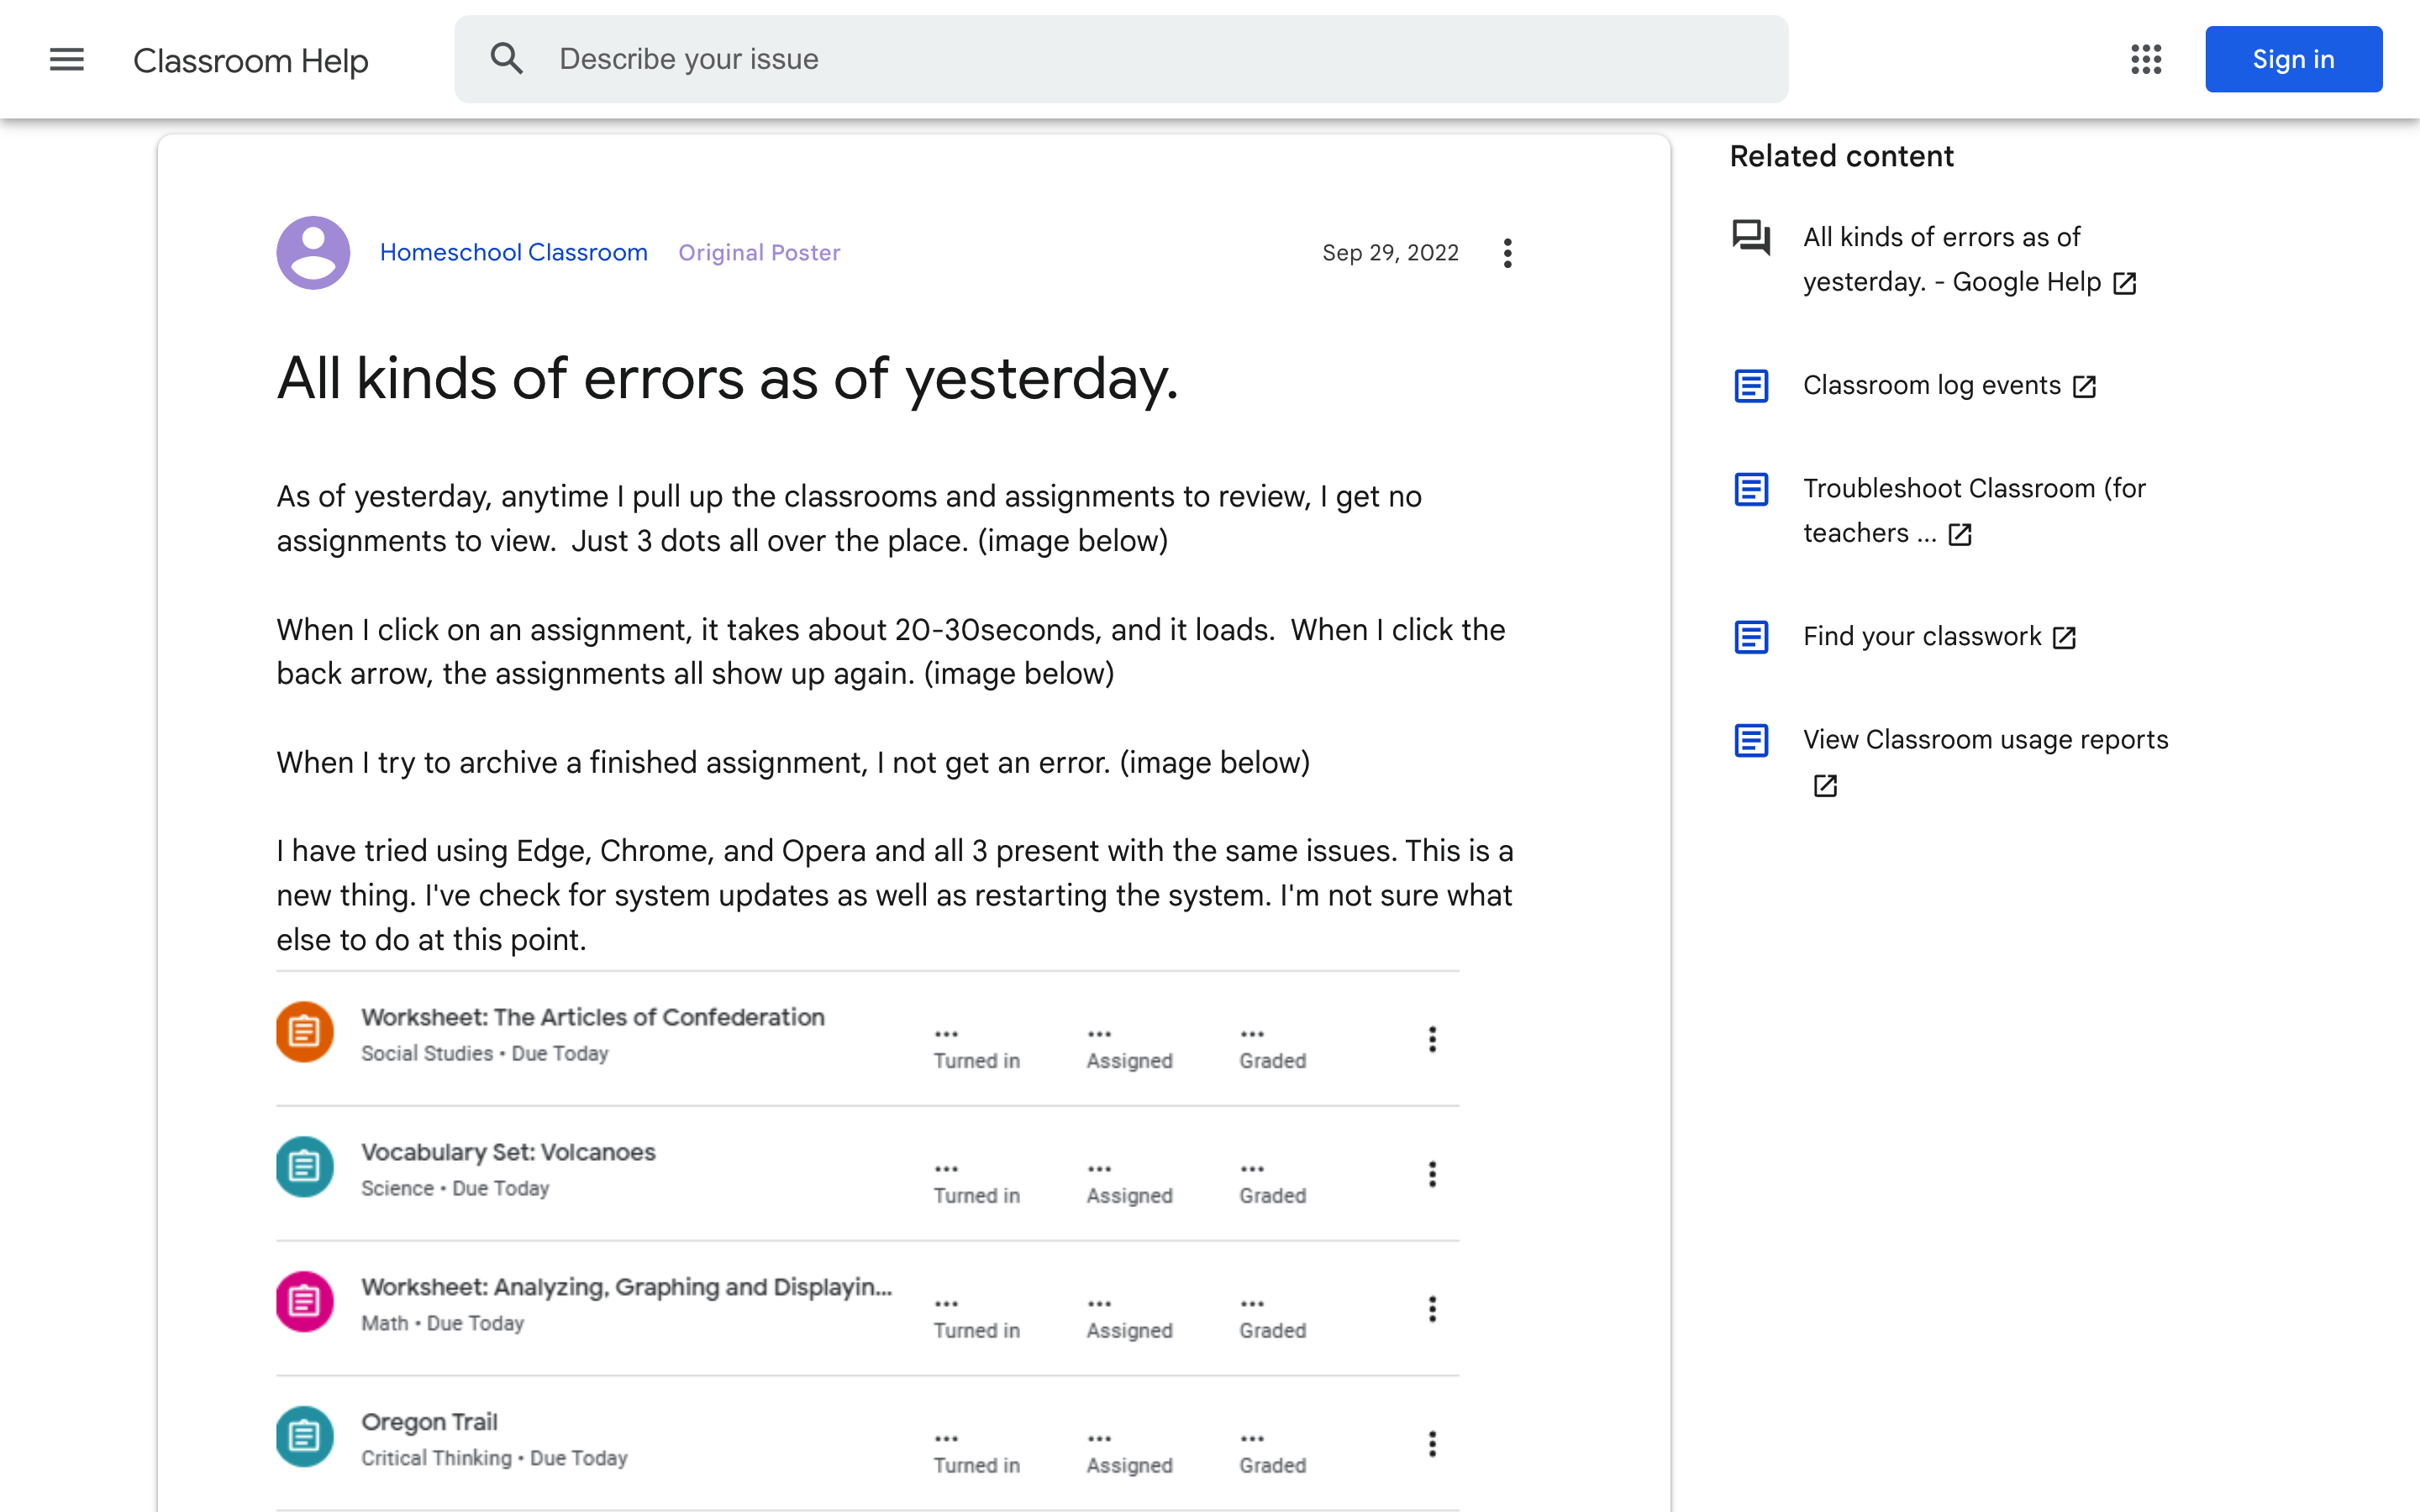 The initial report of users experiencing issues with Google Classroom on September 29, 2022